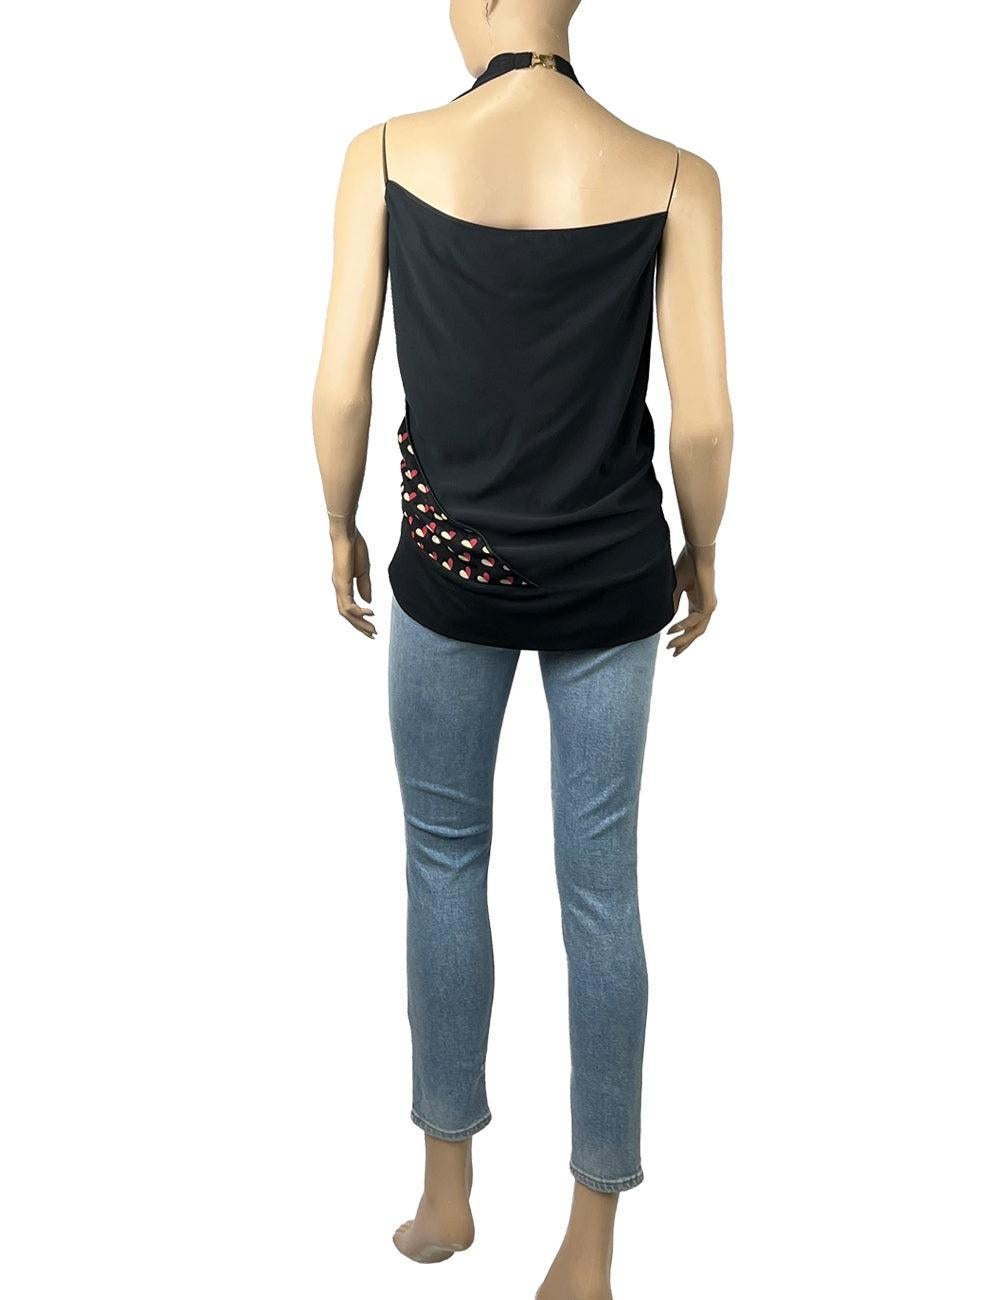 Louis Vuitton EU 36 Black Halter Top With Heart-patterned Bow Detail In Excellent Condition For Sale In Amman, JO